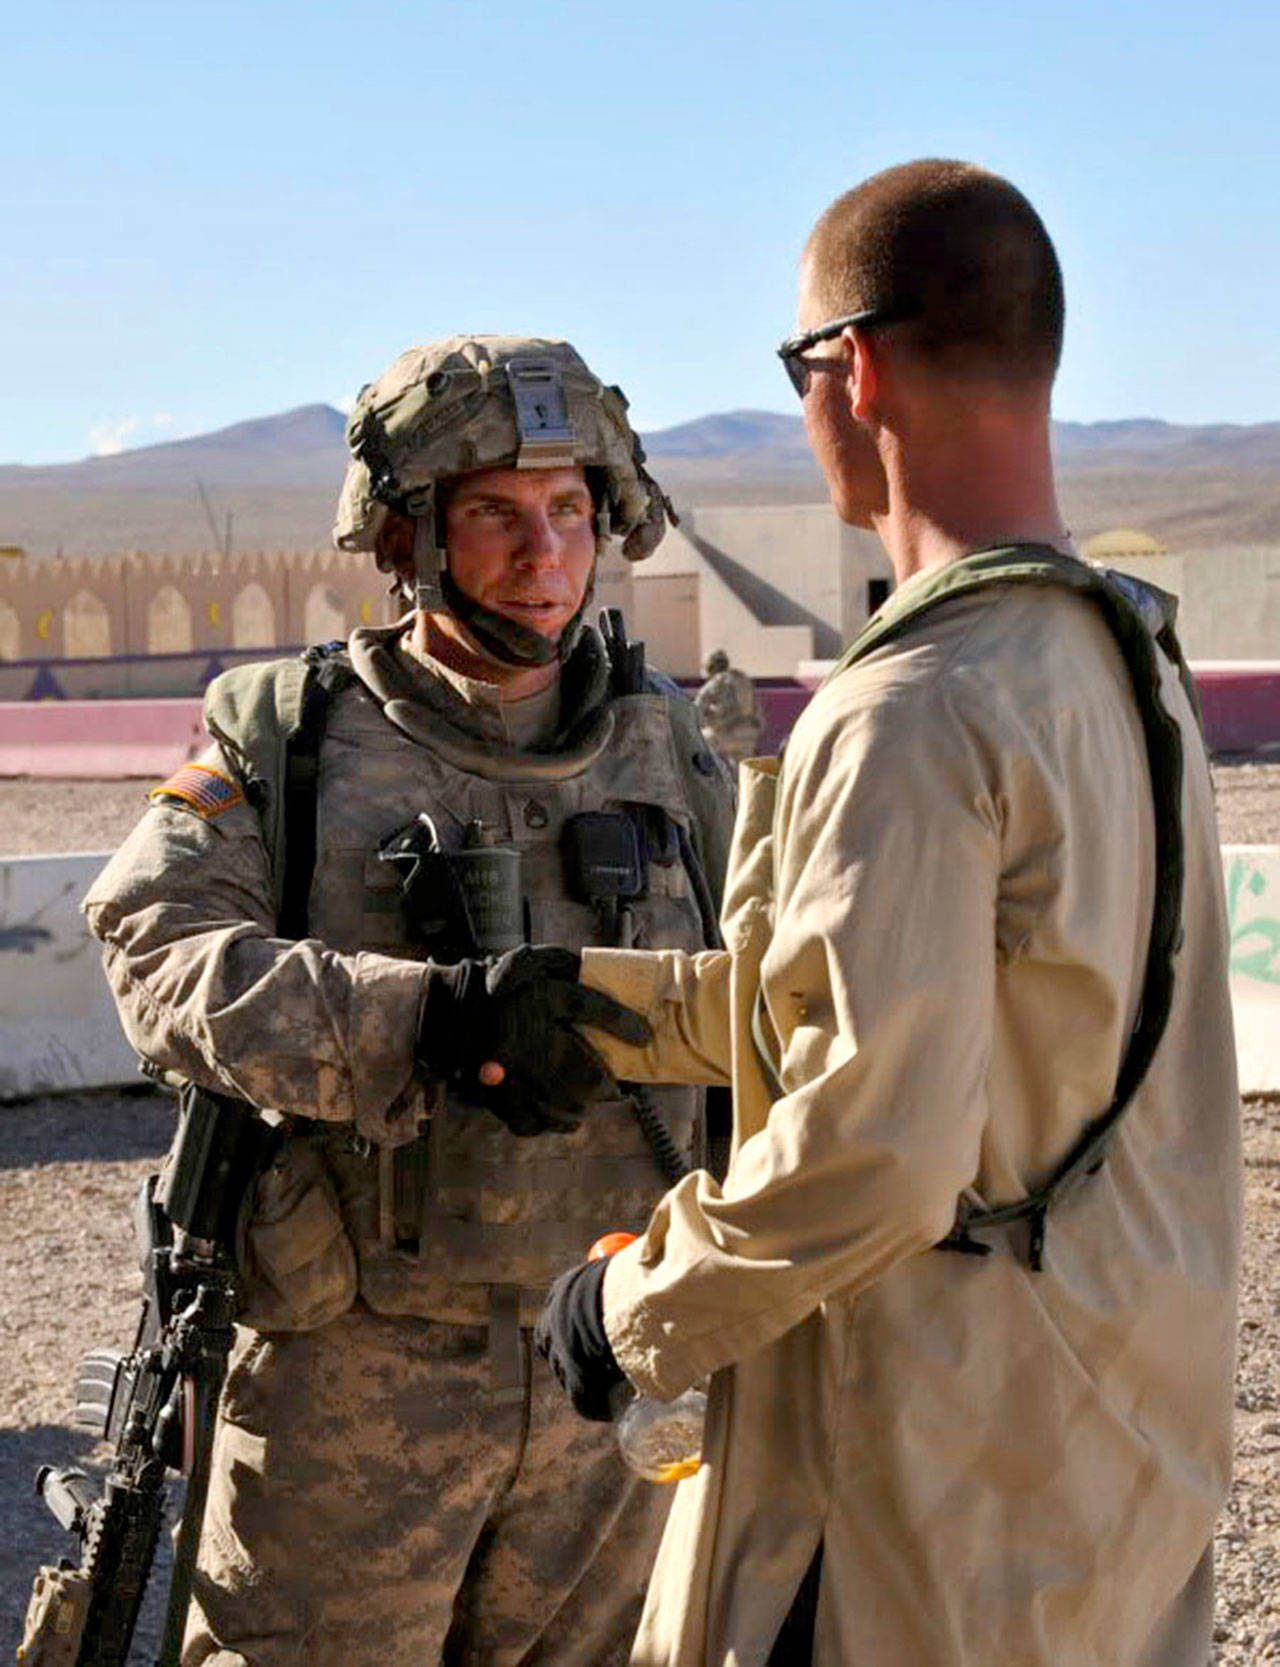 Staff Sgt. Robert Bales, left, is shown during an exercise at the National Training Center in Fort Irwin, California, August 23, 2011. Bales was convicted of shooting, stabbing and burning sleeping villagers in a horrific attack. (U.S. Army Photo via Tacoma News Tribune/MCT)